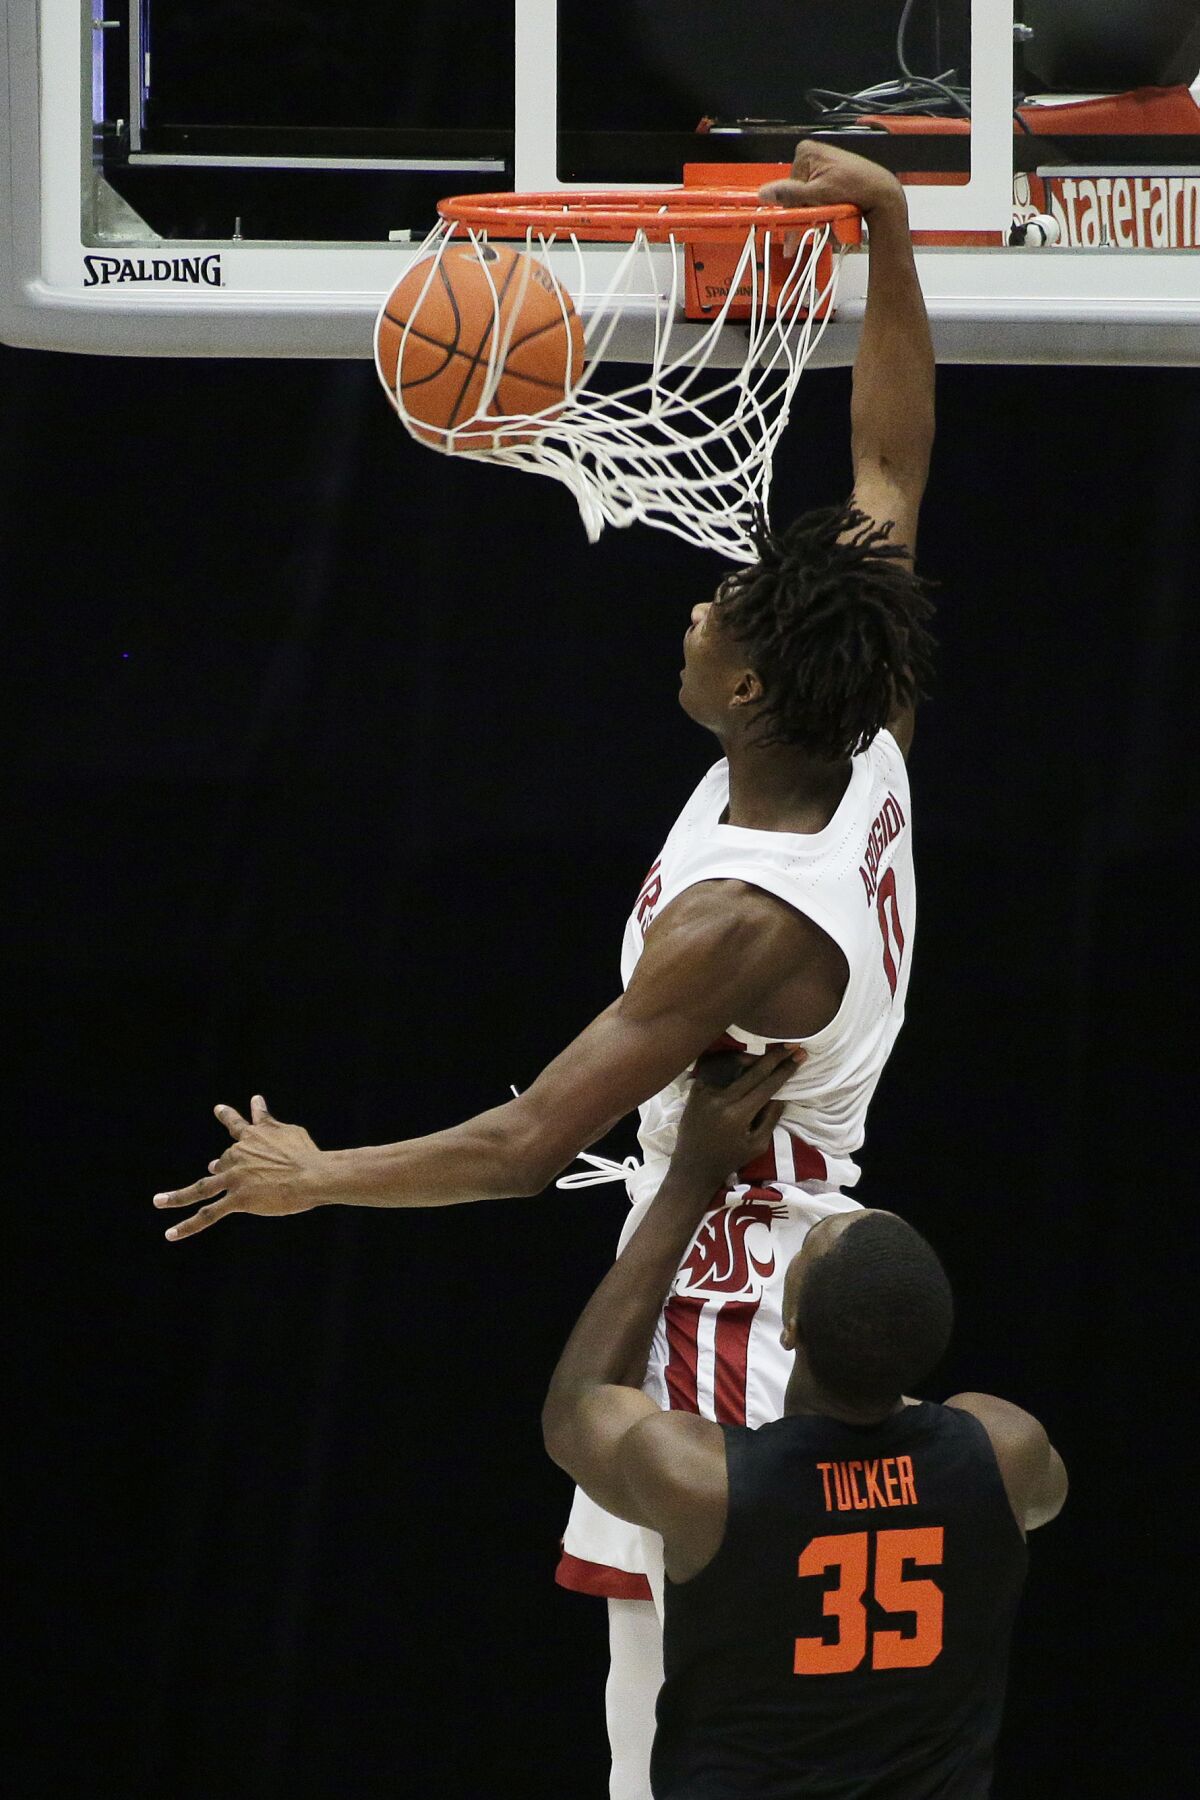 Washington State center Efe Abogidi (0) dunks in front of Oregon State forward Dearon Tucker (35) during the second half of an NCAA college basketball game in Pullman, Wash., Wednesday, Dec. 2, 2020. Washington State won 59-55. (AP Photo/Young Kwak)